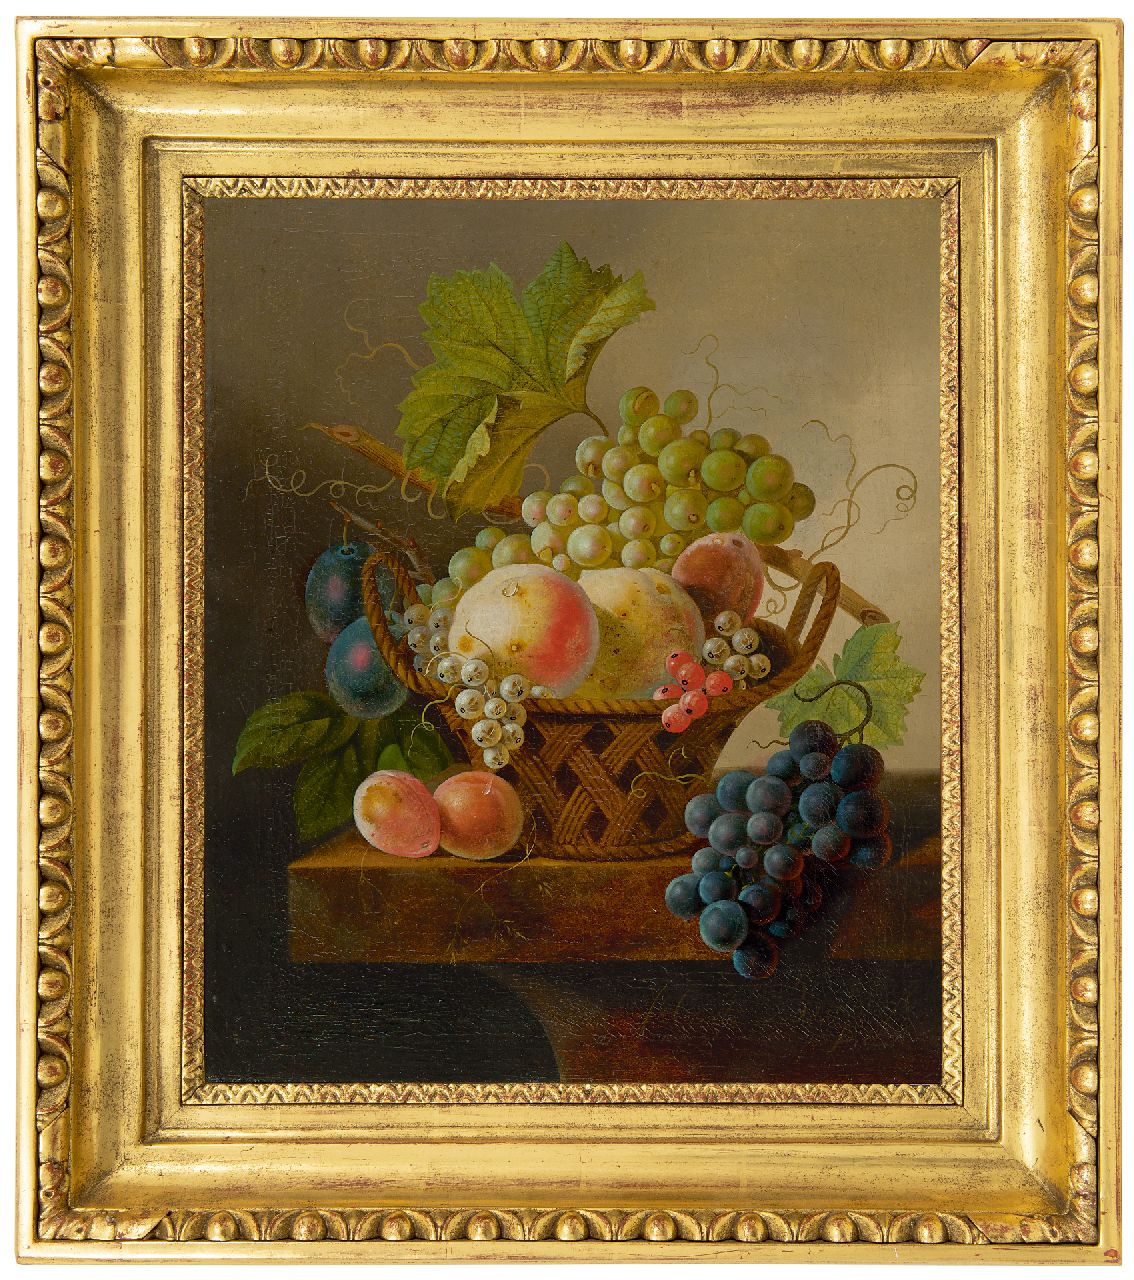 Bruyn J.C. de | Johannes Cornelis de Bruyn | Paintings offered for sale | Still life with grapes and peaches in a basket, oil on canvas 43.8 x 36.0 cm, signed l.r.